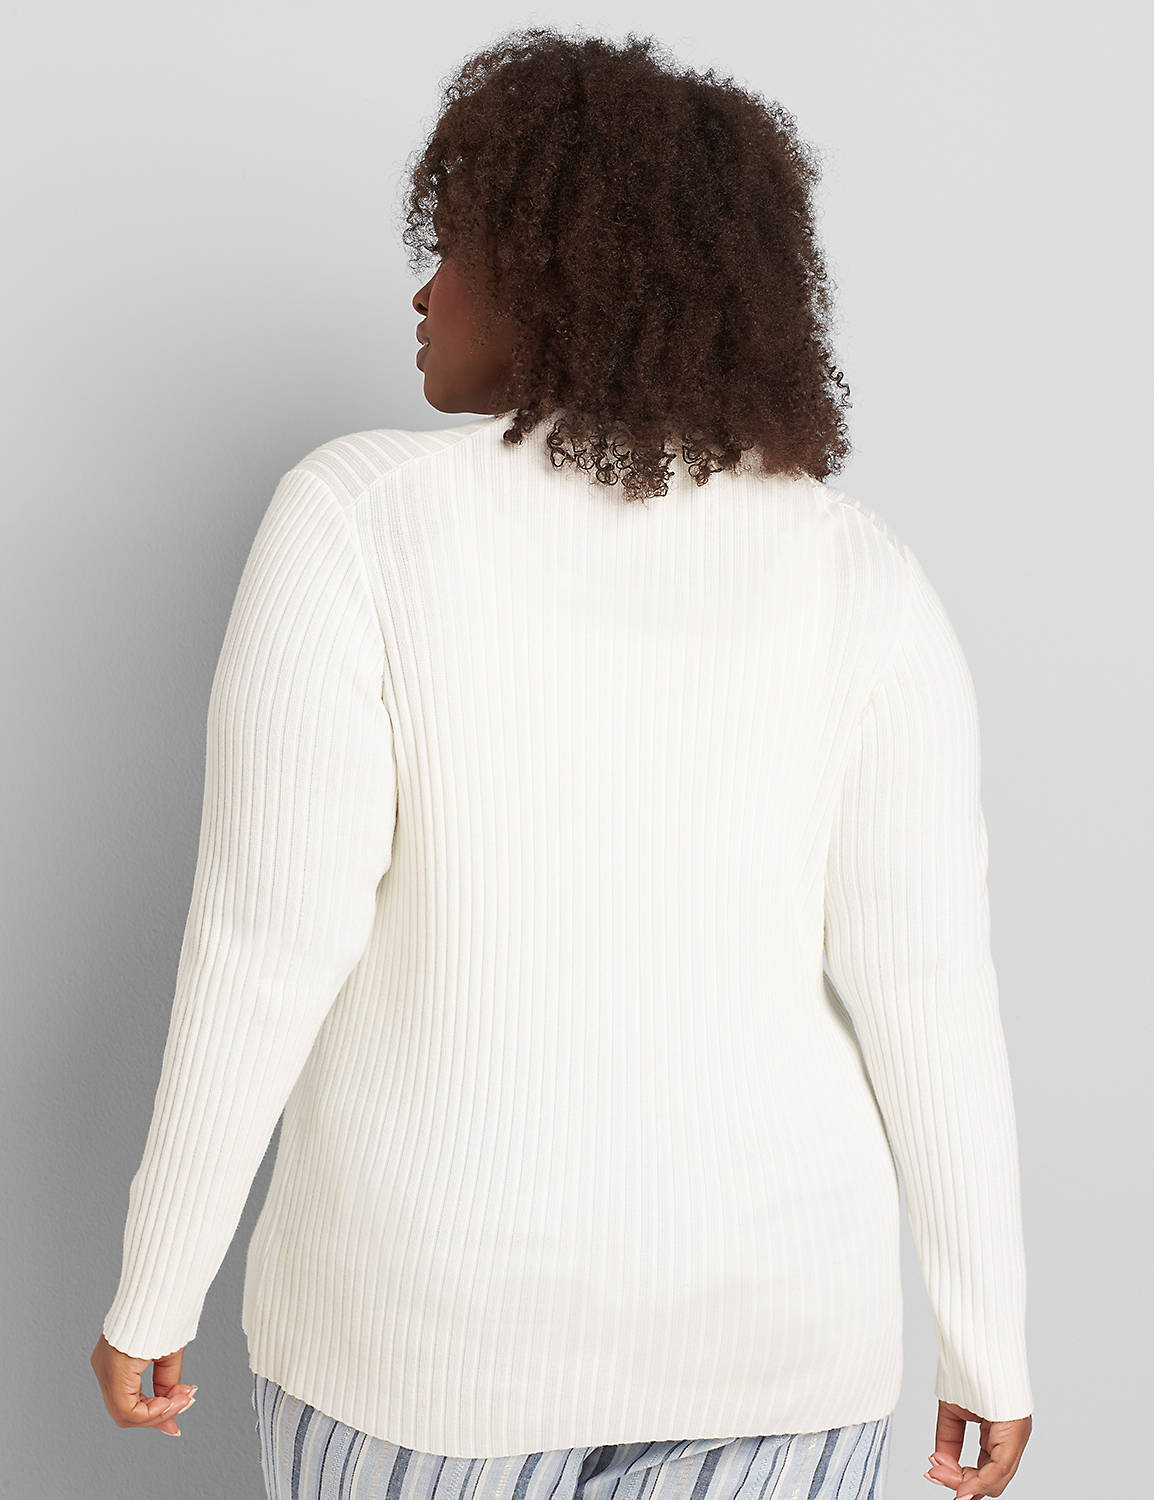 Long Sleeve VNeck Button Front Cardigan in Rib Stitch 1121476:Ascena White:18/20 Product Image 2